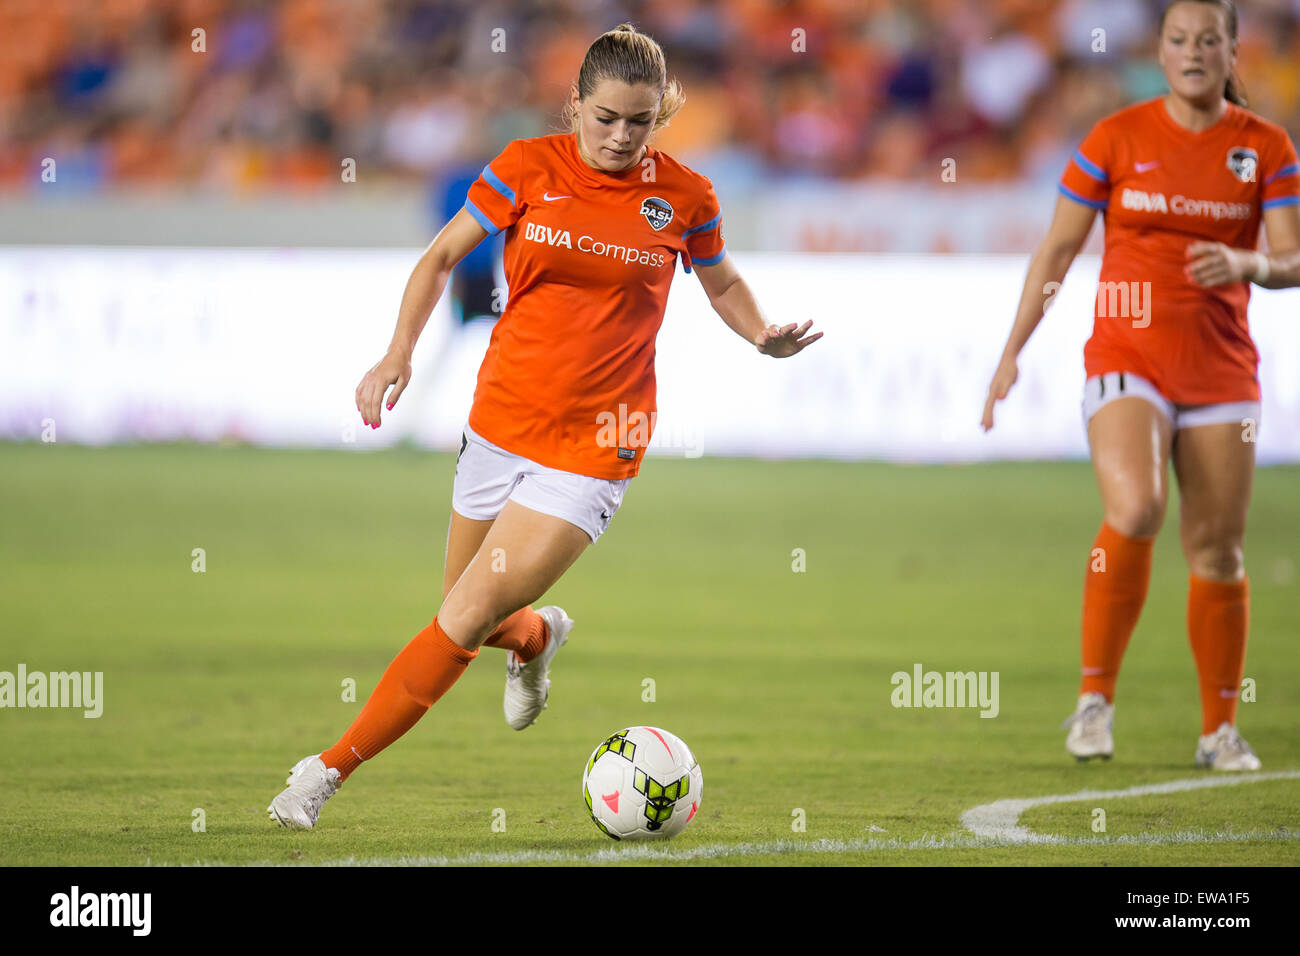 Houston, Texas, USA. 20th June, 2015. Houston Dash forward Kealia Ohai (7) controls the ball during an NWSL game between the Houston Dash and the Western New York Flash at BBVA Compass Stadium in Houston, TX on June 20th, 2015. The Dash won 2-0. Credit:  Trask Smith/ZUMA Wire/Alamy Live News Stock Photo